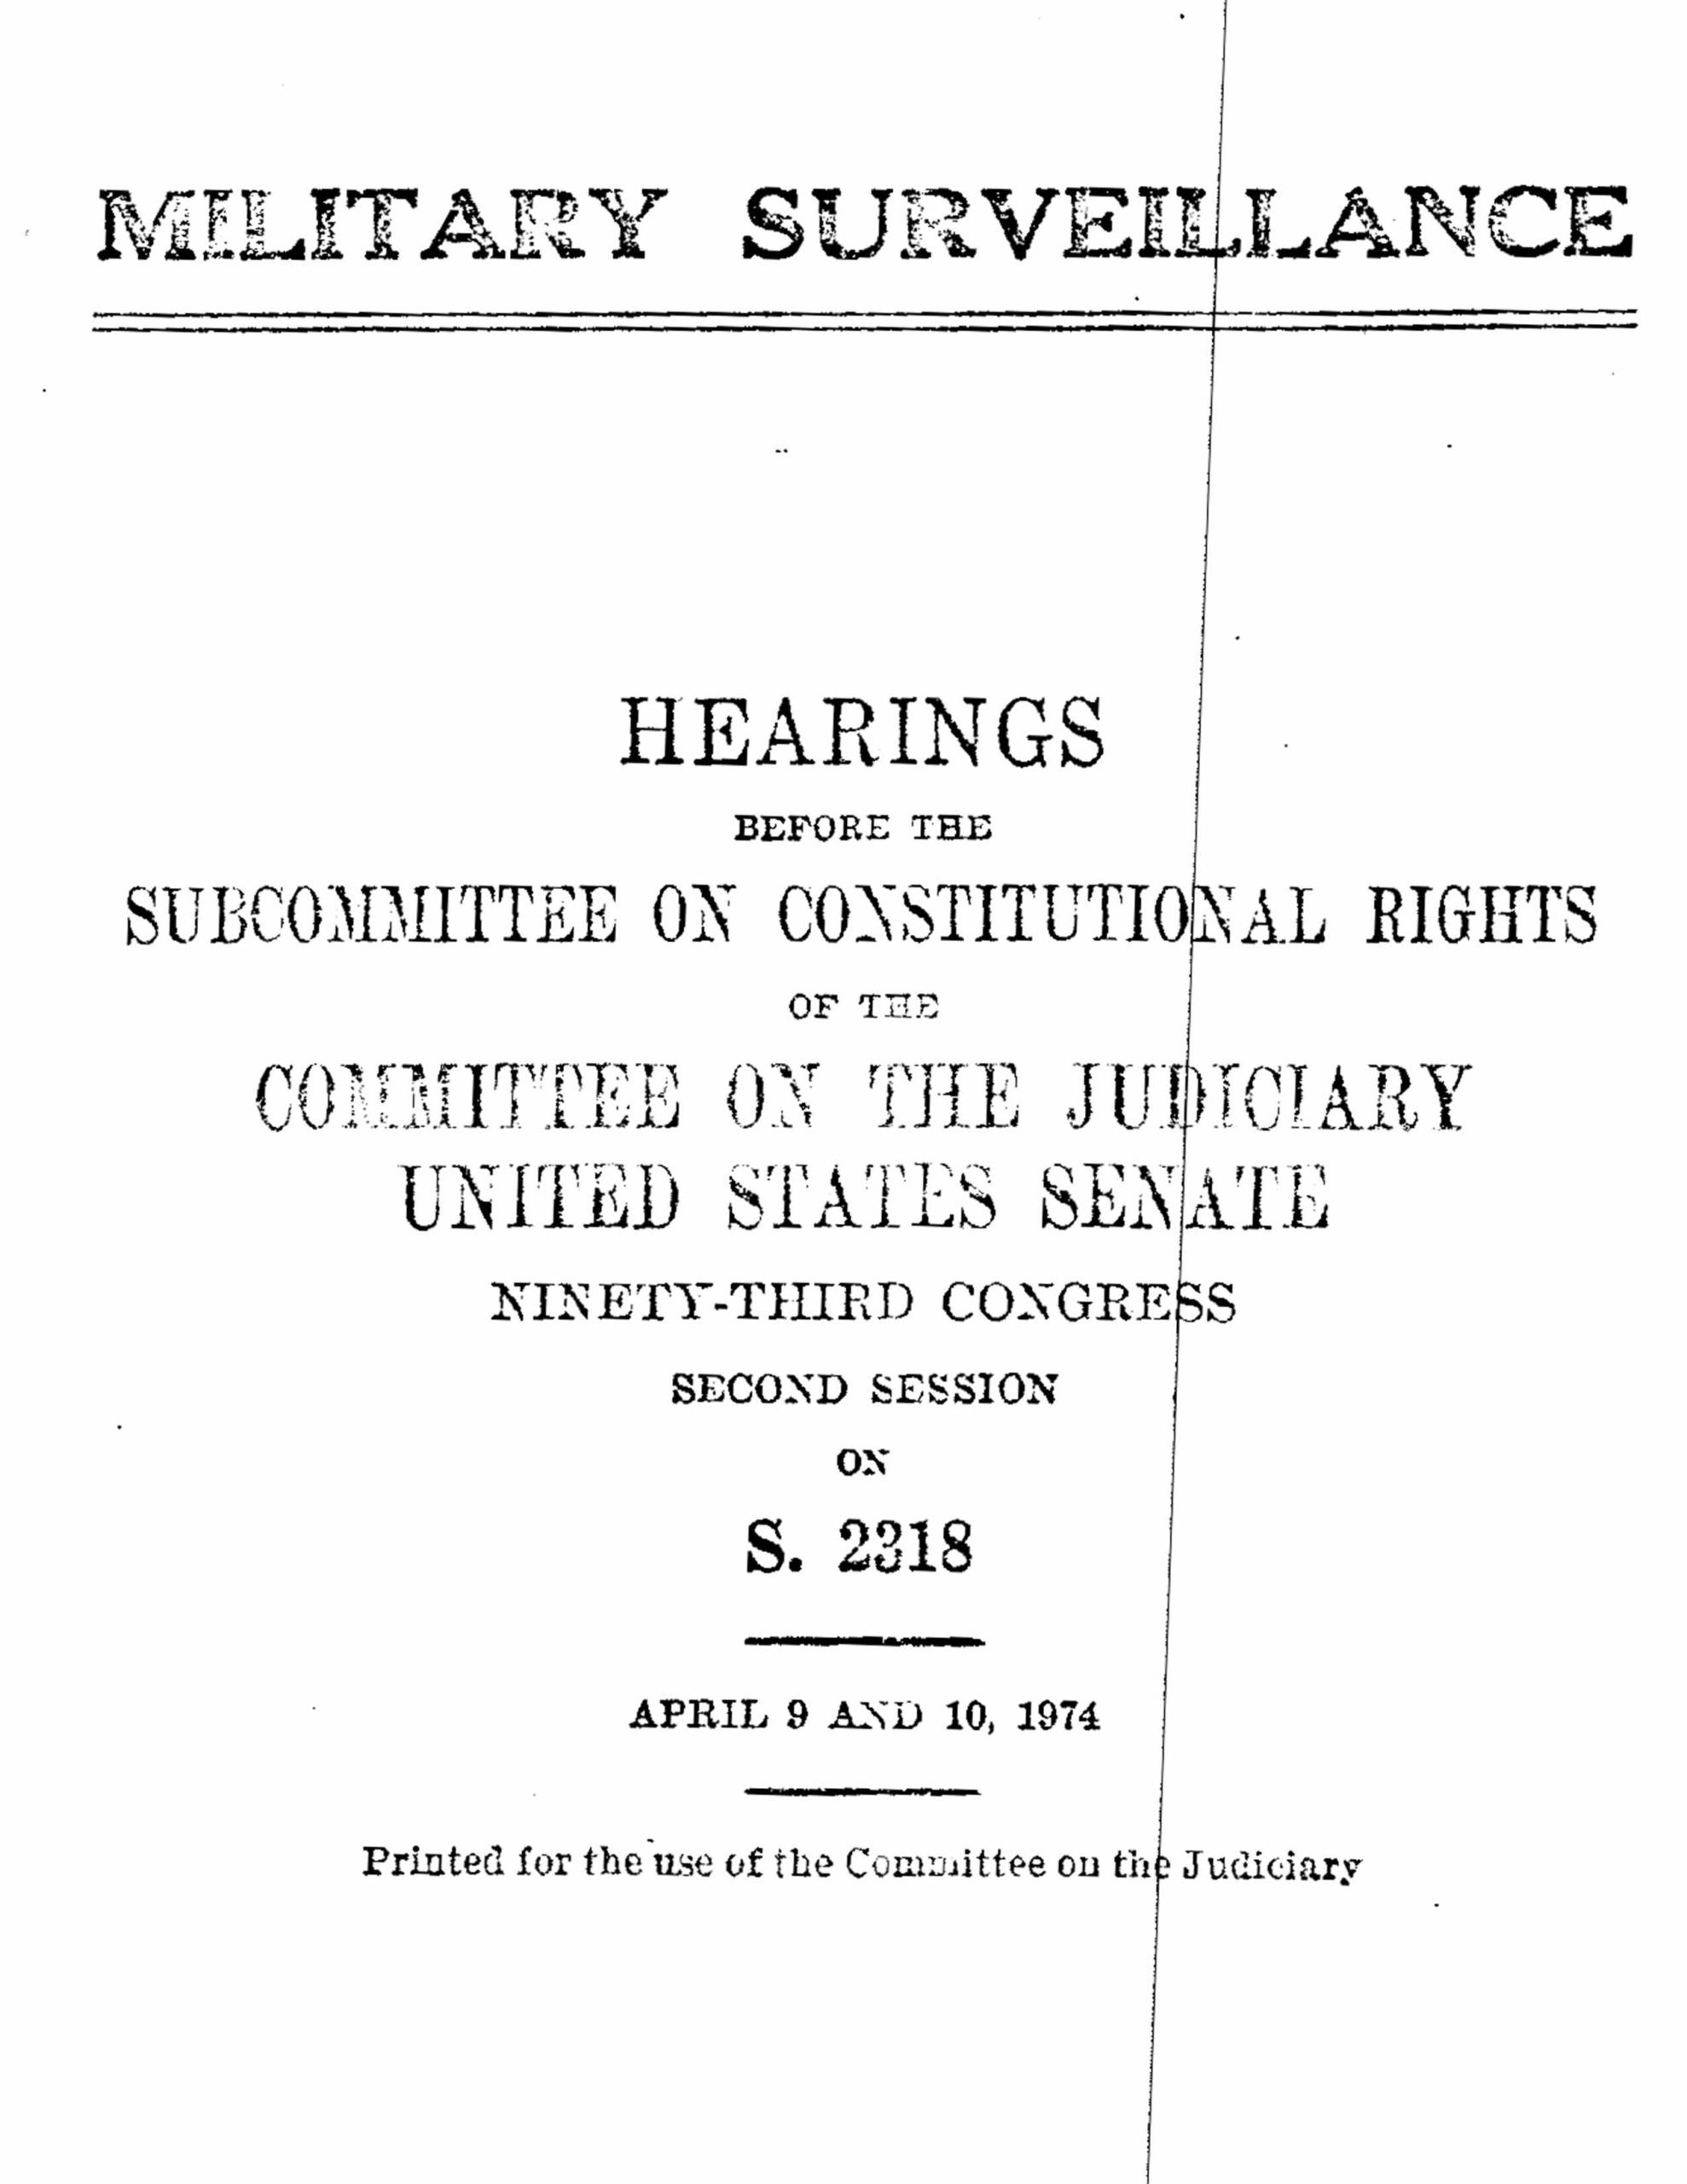 4/79/1974 Congressional Record Book Cover, 2422 Colony Court, Northbrook, IL Print copy of Hearings of the Senate Judiciary Committee on Military Surveillance, Northbrook, IL 2023